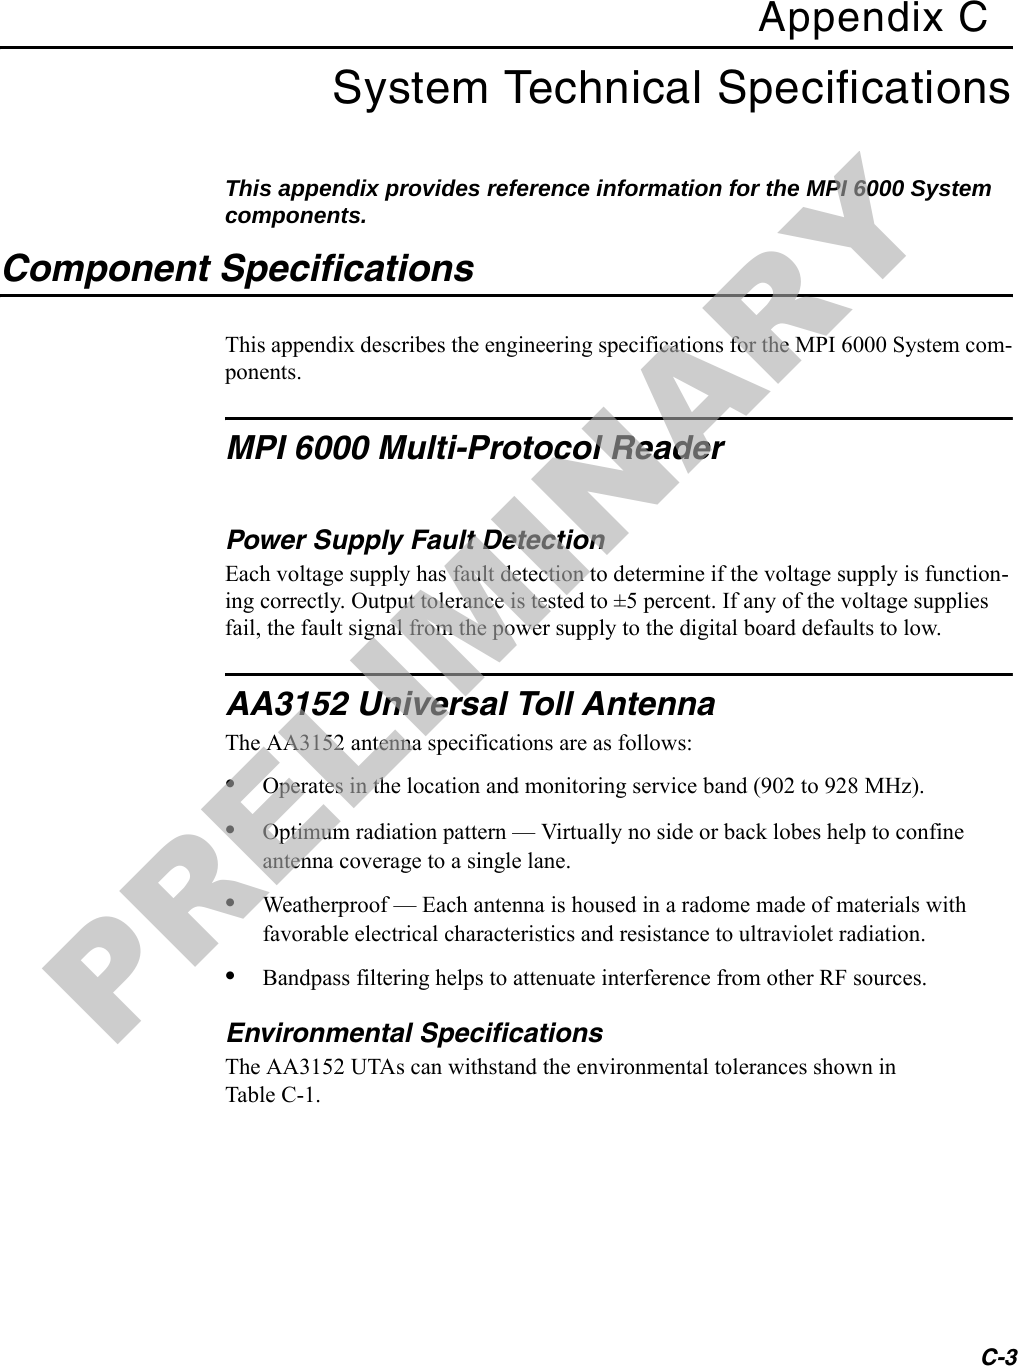 C-3Appendix CSystem Technical SpecificationsThis appendix provides reference information for the MPI 6000 System components.Component SpecificationsThis appendix describes the engineering specifications for the MPI 6000 System com-ponents.MPI 6000 Multi-Protocol ReaderPower Supply Fault DetectionEach voltage supply has fault detection to determine if the voltage supply is function-ing correctly. Output tolerance is tested to ±5 percent. If any of the voltage supplies fail, the fault signal from the power supply to the digital board defaults to low. AA3152 Universal Toll AntennaThe AA3152 antenna specifications are as follows:•Operates in the location and monitoring service band (902 to 928 MHz).•Optimum radiation pattern — Virtually no side or back lobes help to confine antenna coverage to a single lane.•Weatherproof — Each antenna is housed in a radome made of materials with favorable electrical characteristics and resistance to ultraviolet radiation.•Bandpass filtering helps to attenuate interference from other RF sources.Environmental SpecificationsThe AA3152 UTAs can withstand the environmental tolerances shown in Table C-1.PRELIMINARY